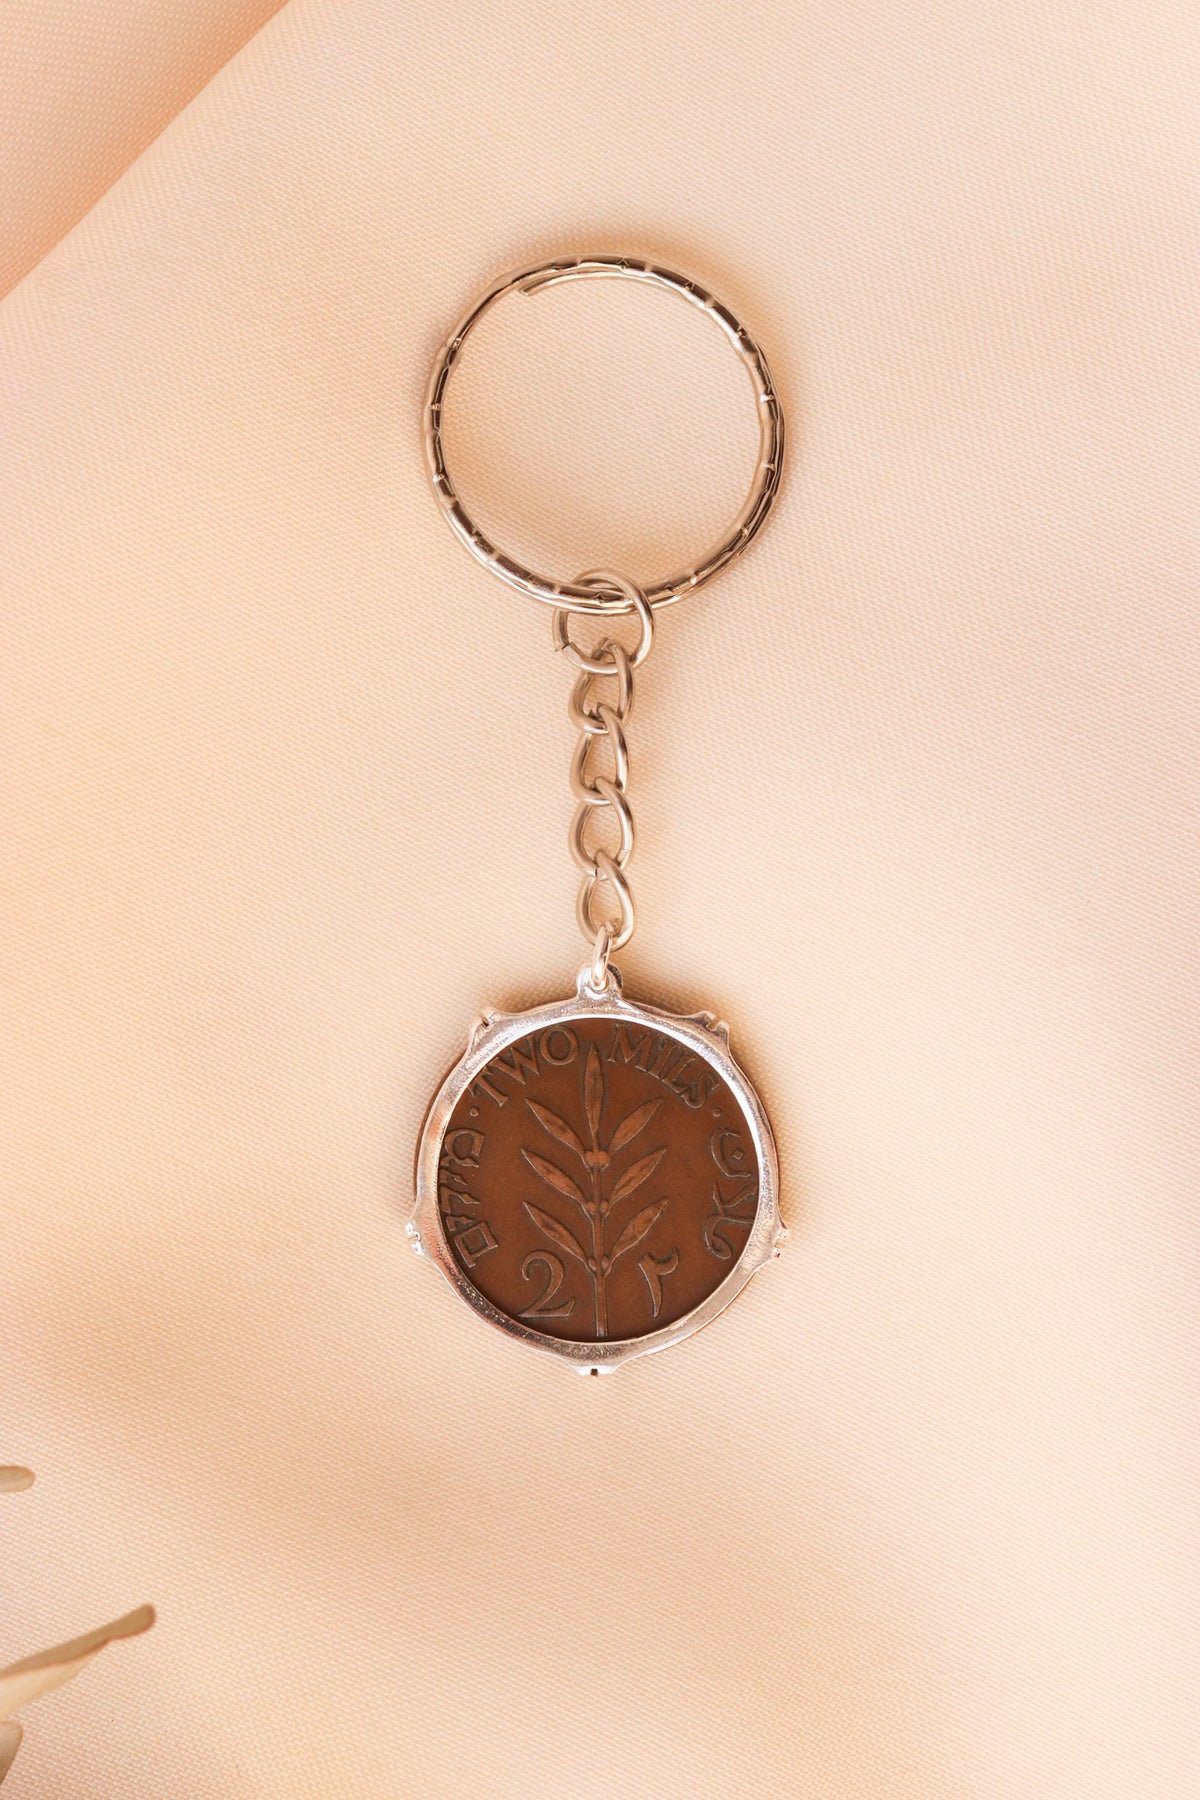 Palestinian coin 2 mil crown frame keychain